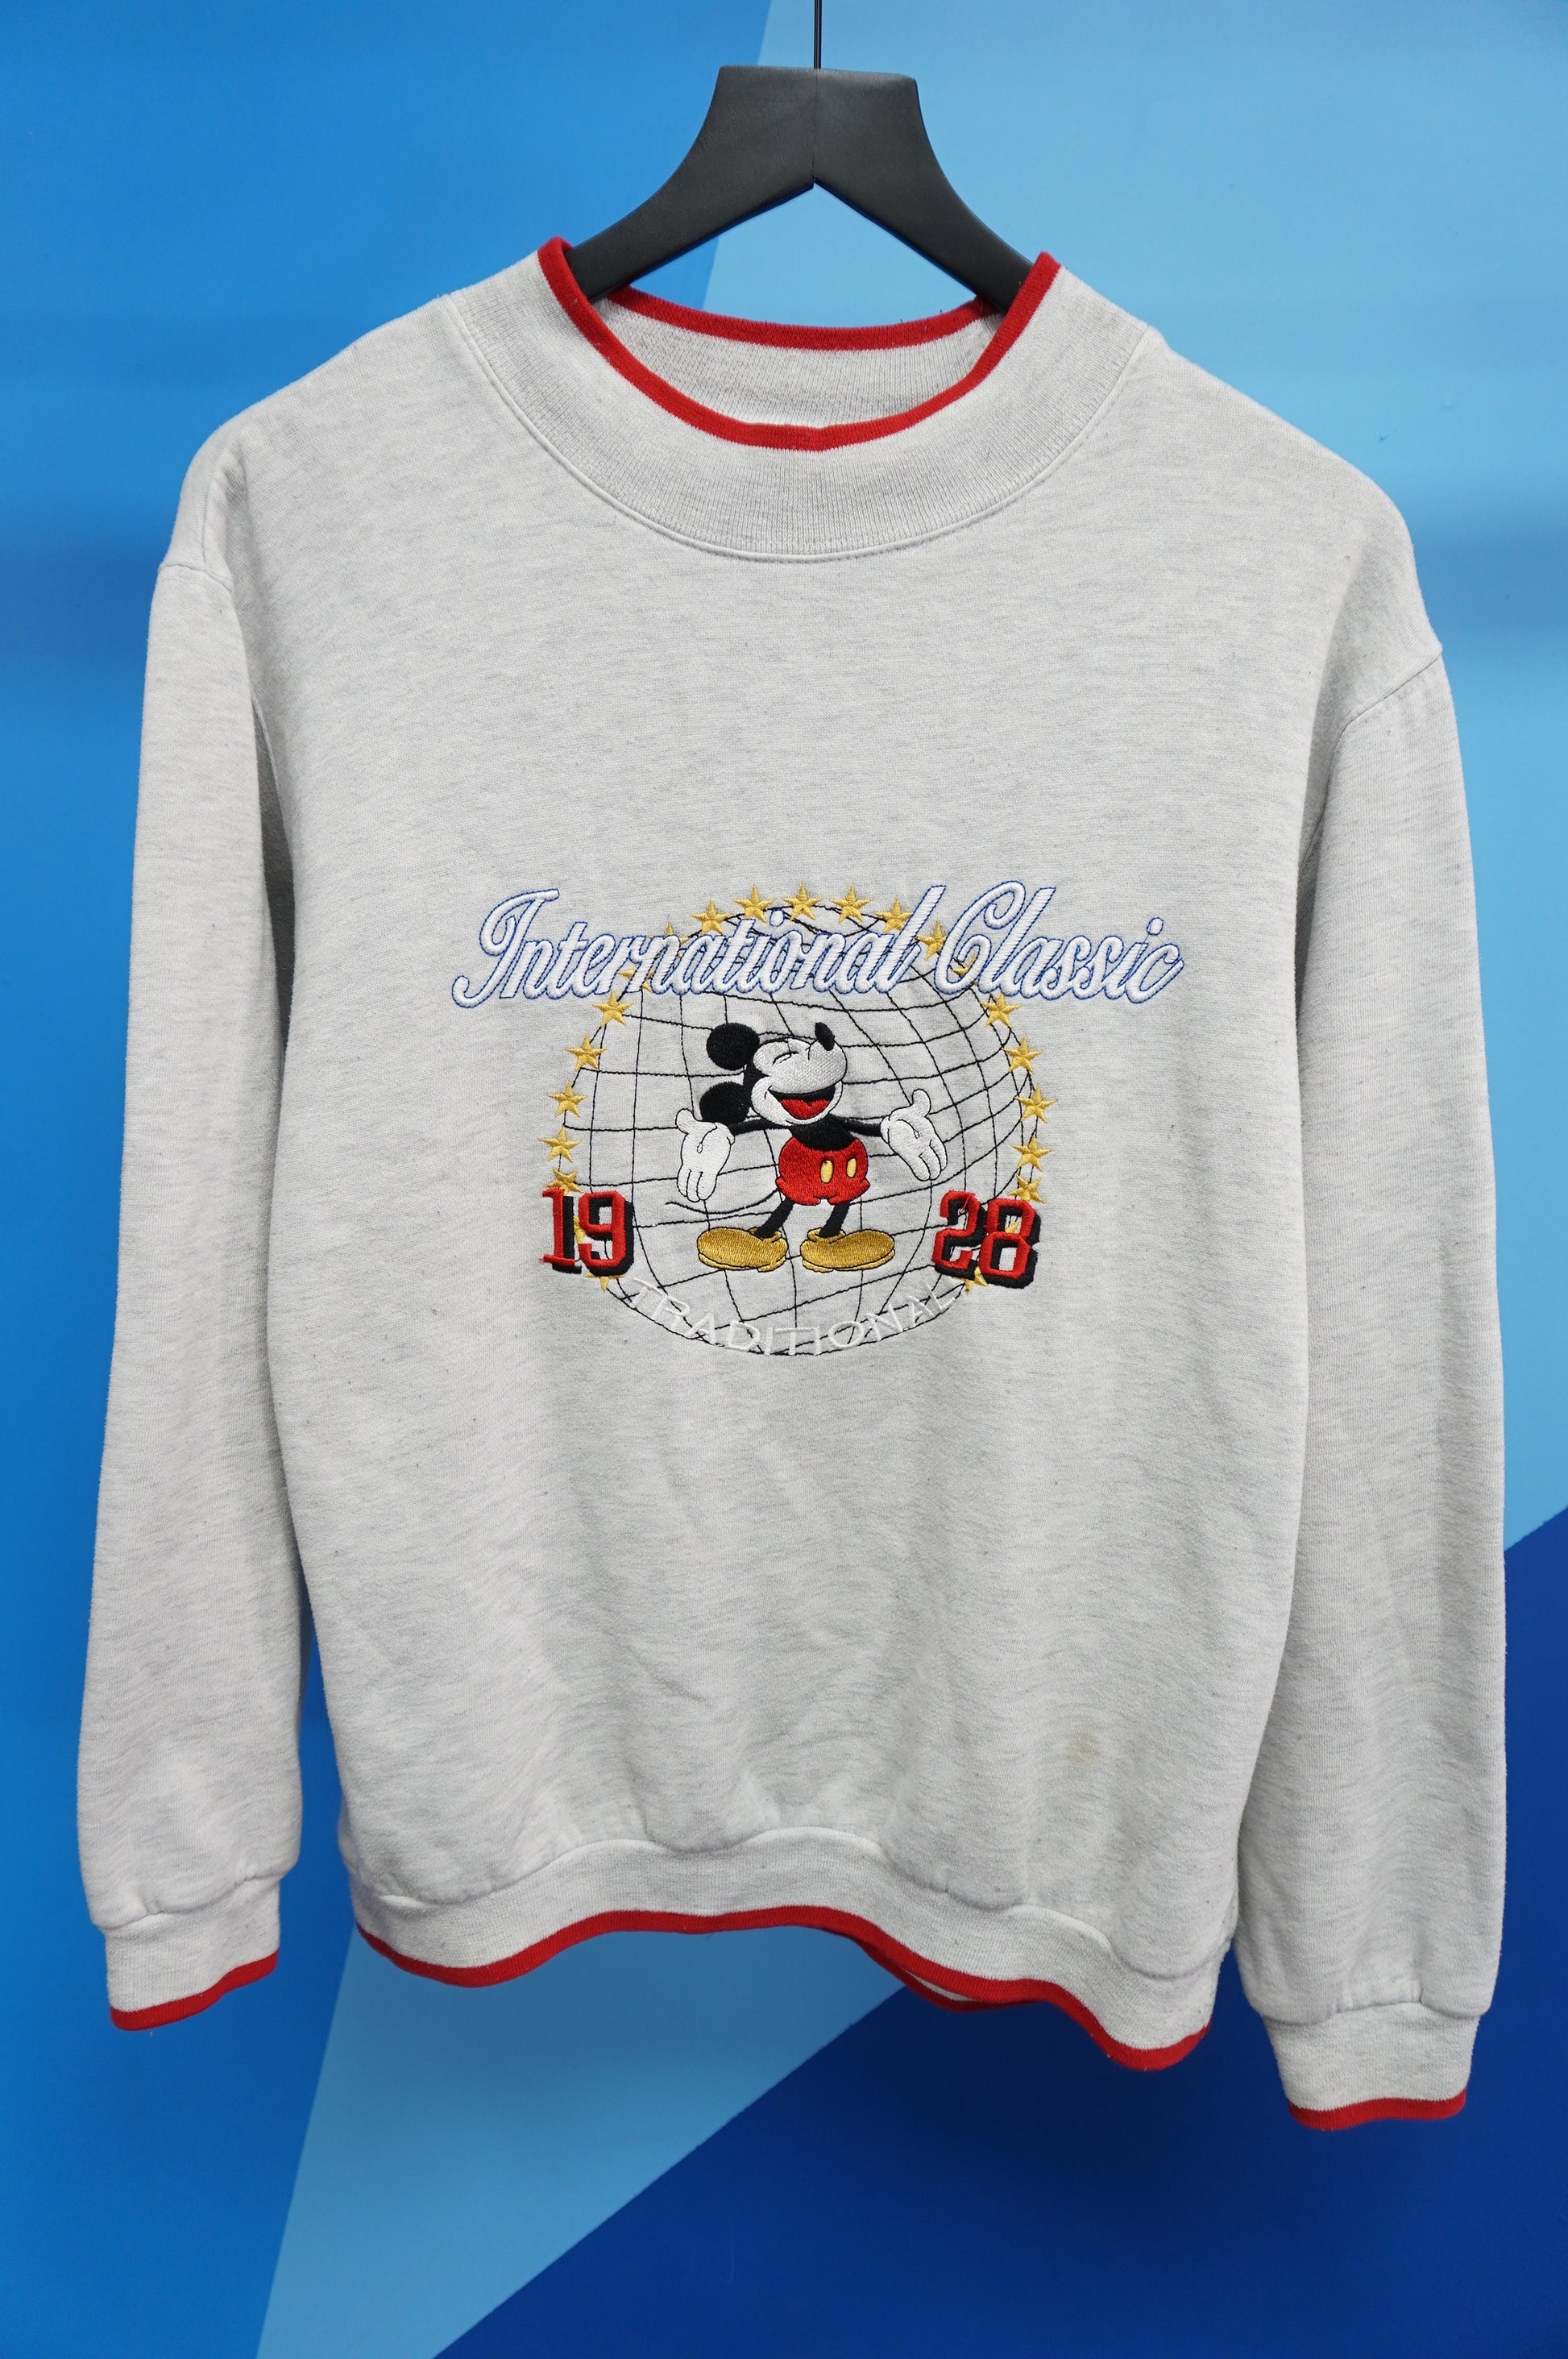 CHASER BRAND - MICKEY MOUSE RADIANT PEACE CREWNECK – swirlboutique